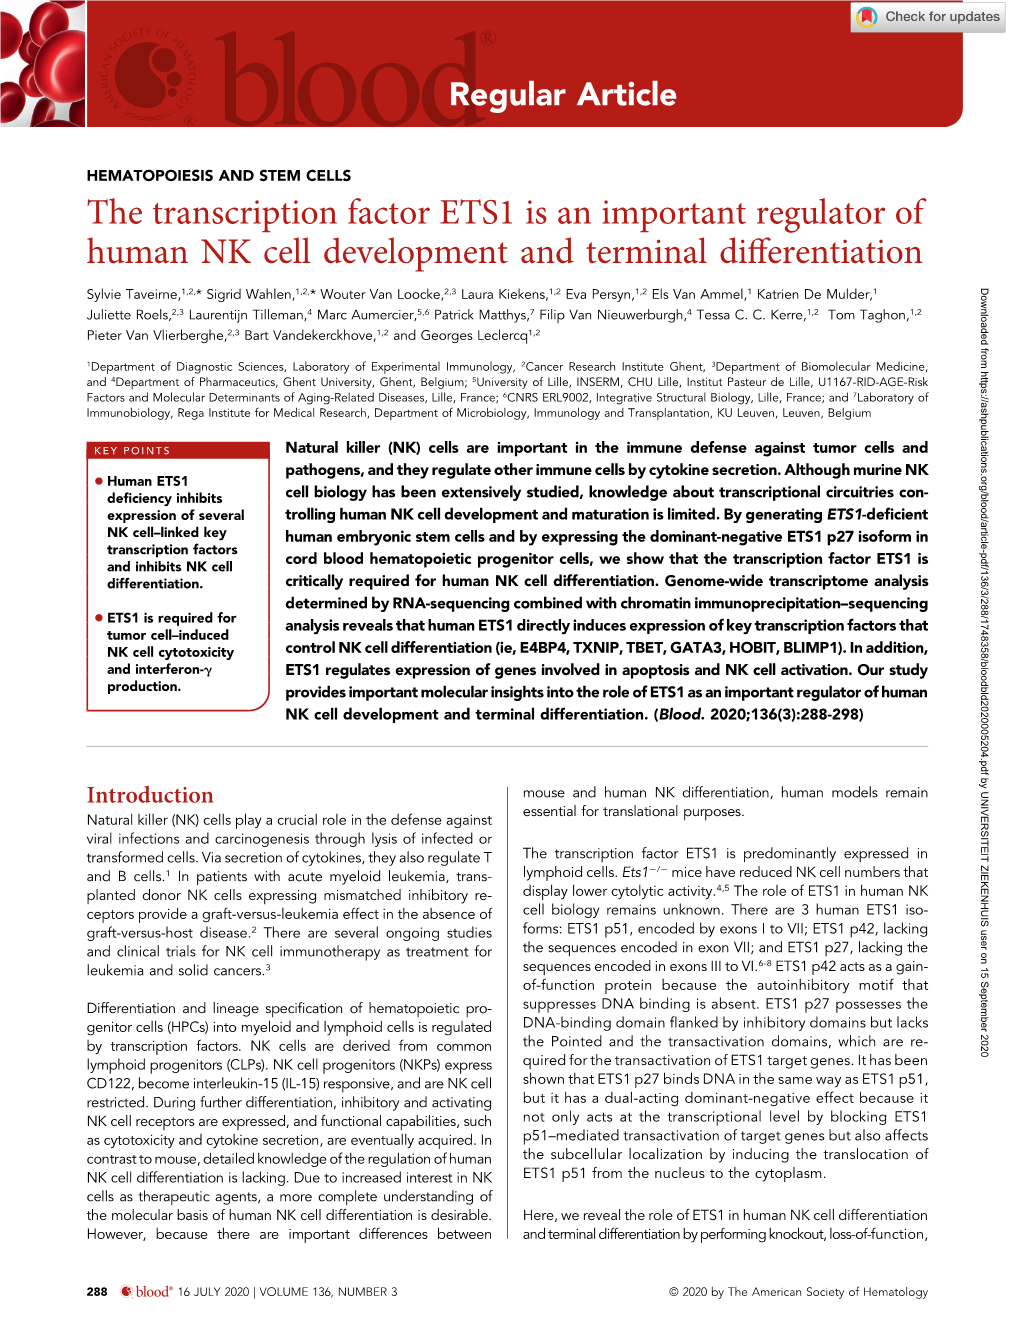 The Transcription Factor ETS1 Is an Important Regulator of Human NK